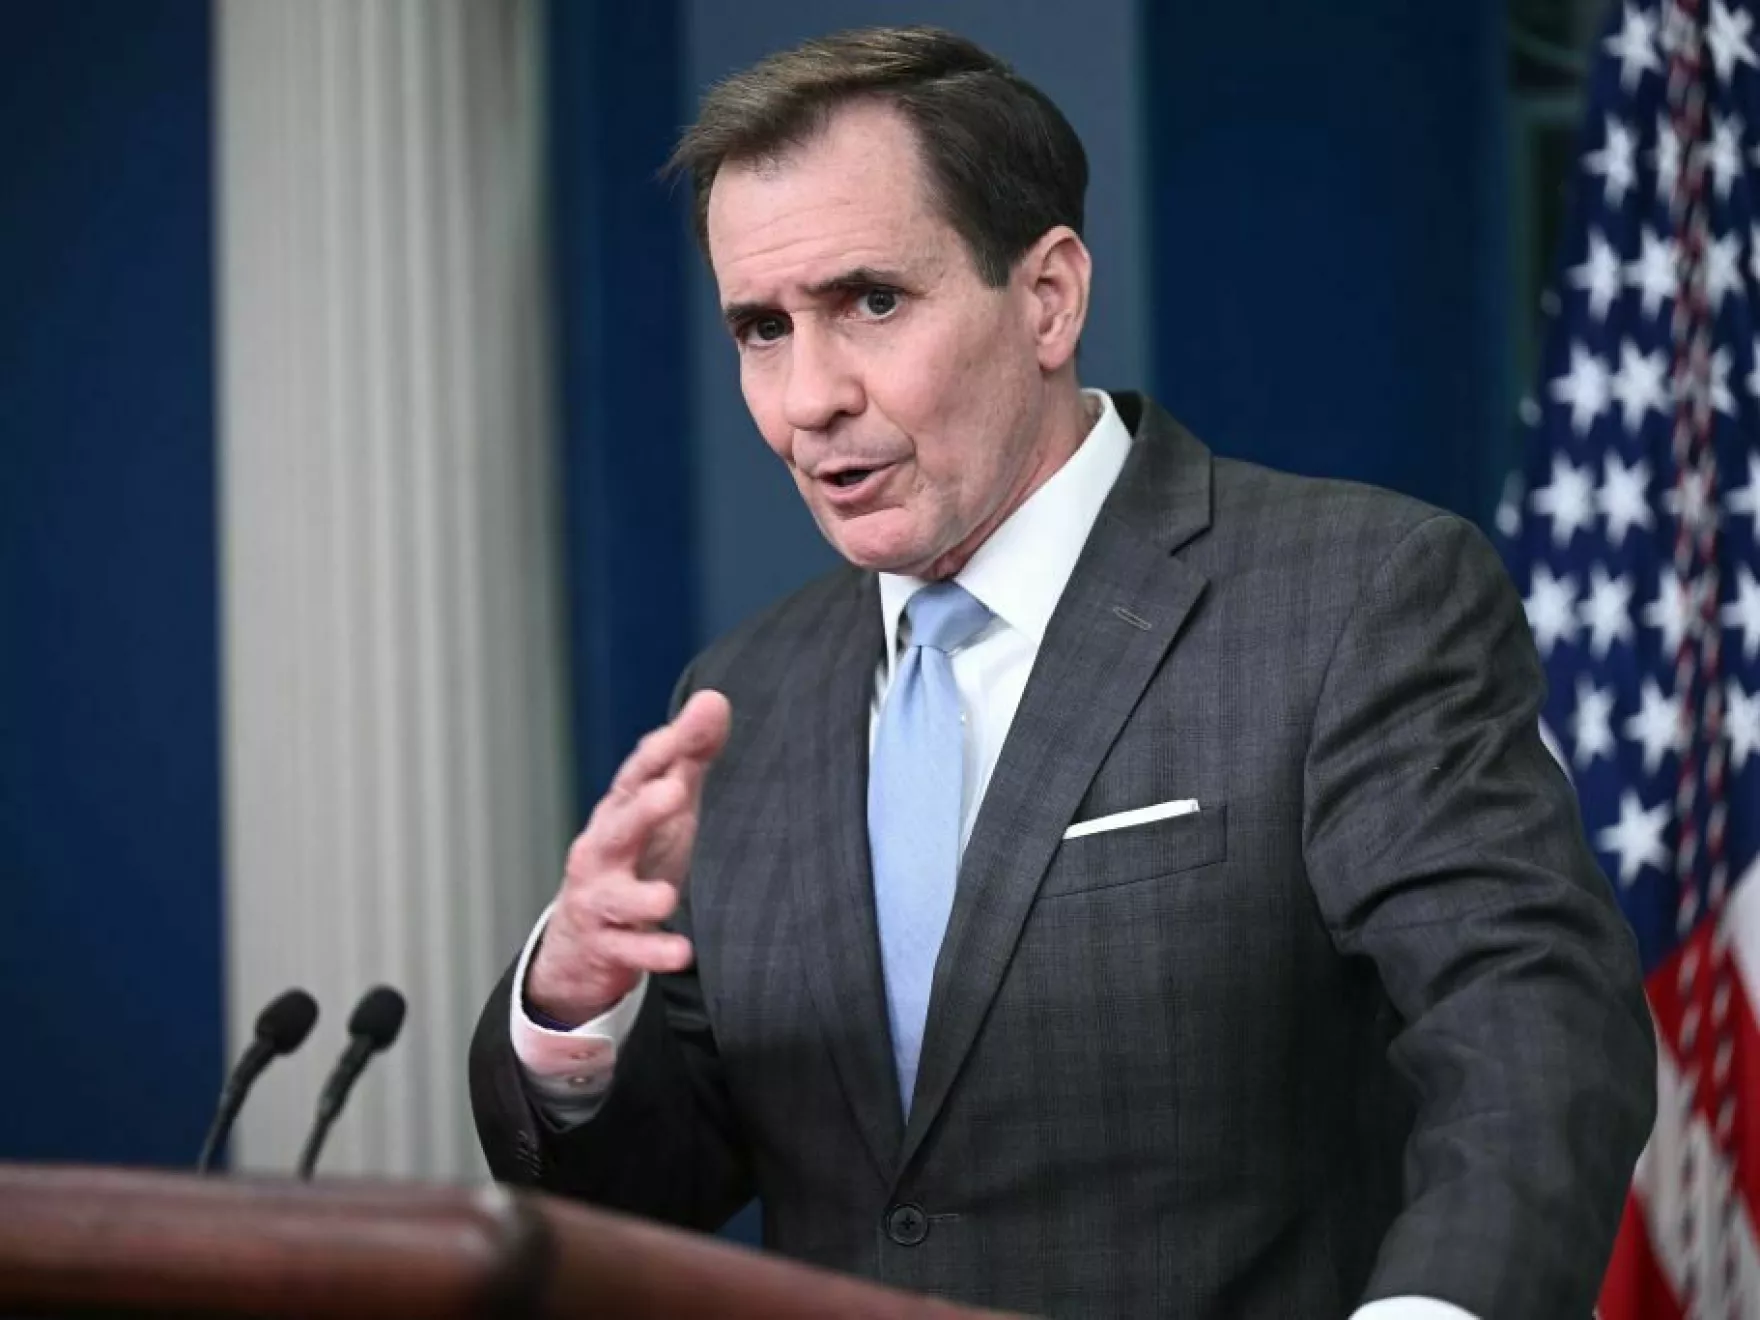 BRENDAN SMIALOWSKI / AFP Via Getty Images The object was tracked over Alaska at an altitude of 40,000 feet over the past 24 hours, John Kirby, a spokesman for the White House National Security Council., said.